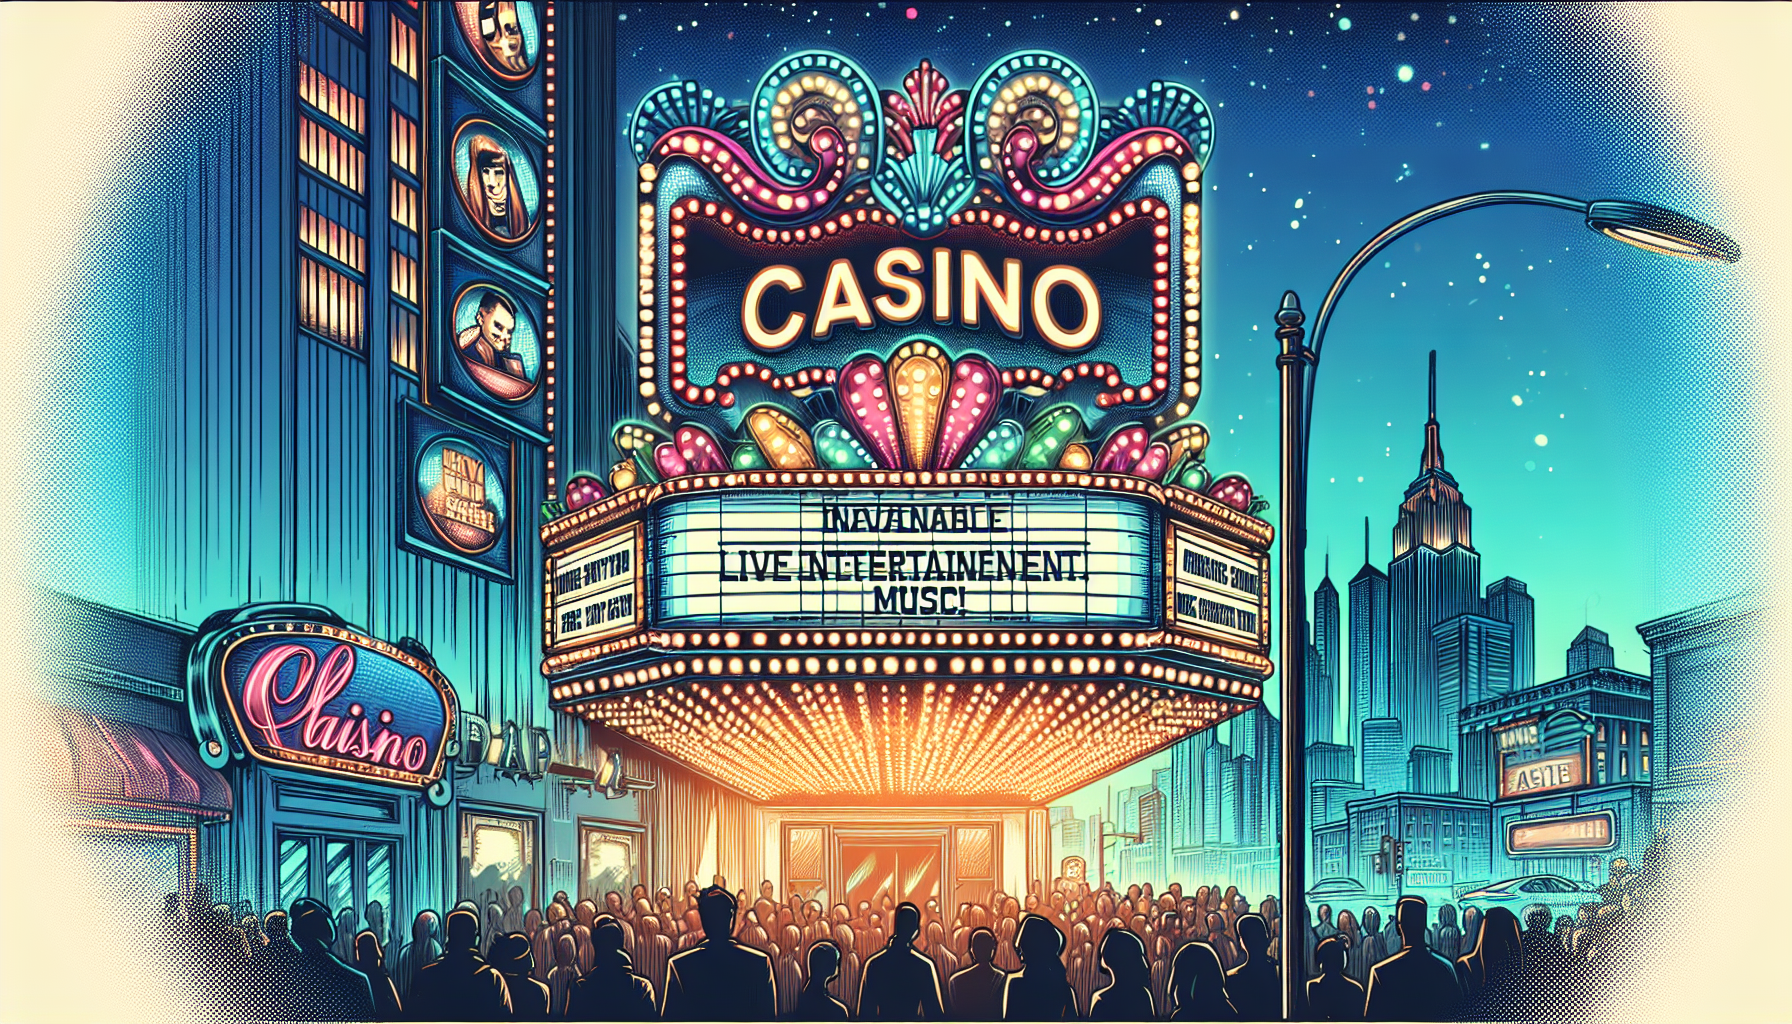 Where Can I Find Casinos With Live Entertainment And Music In Las Vegas?